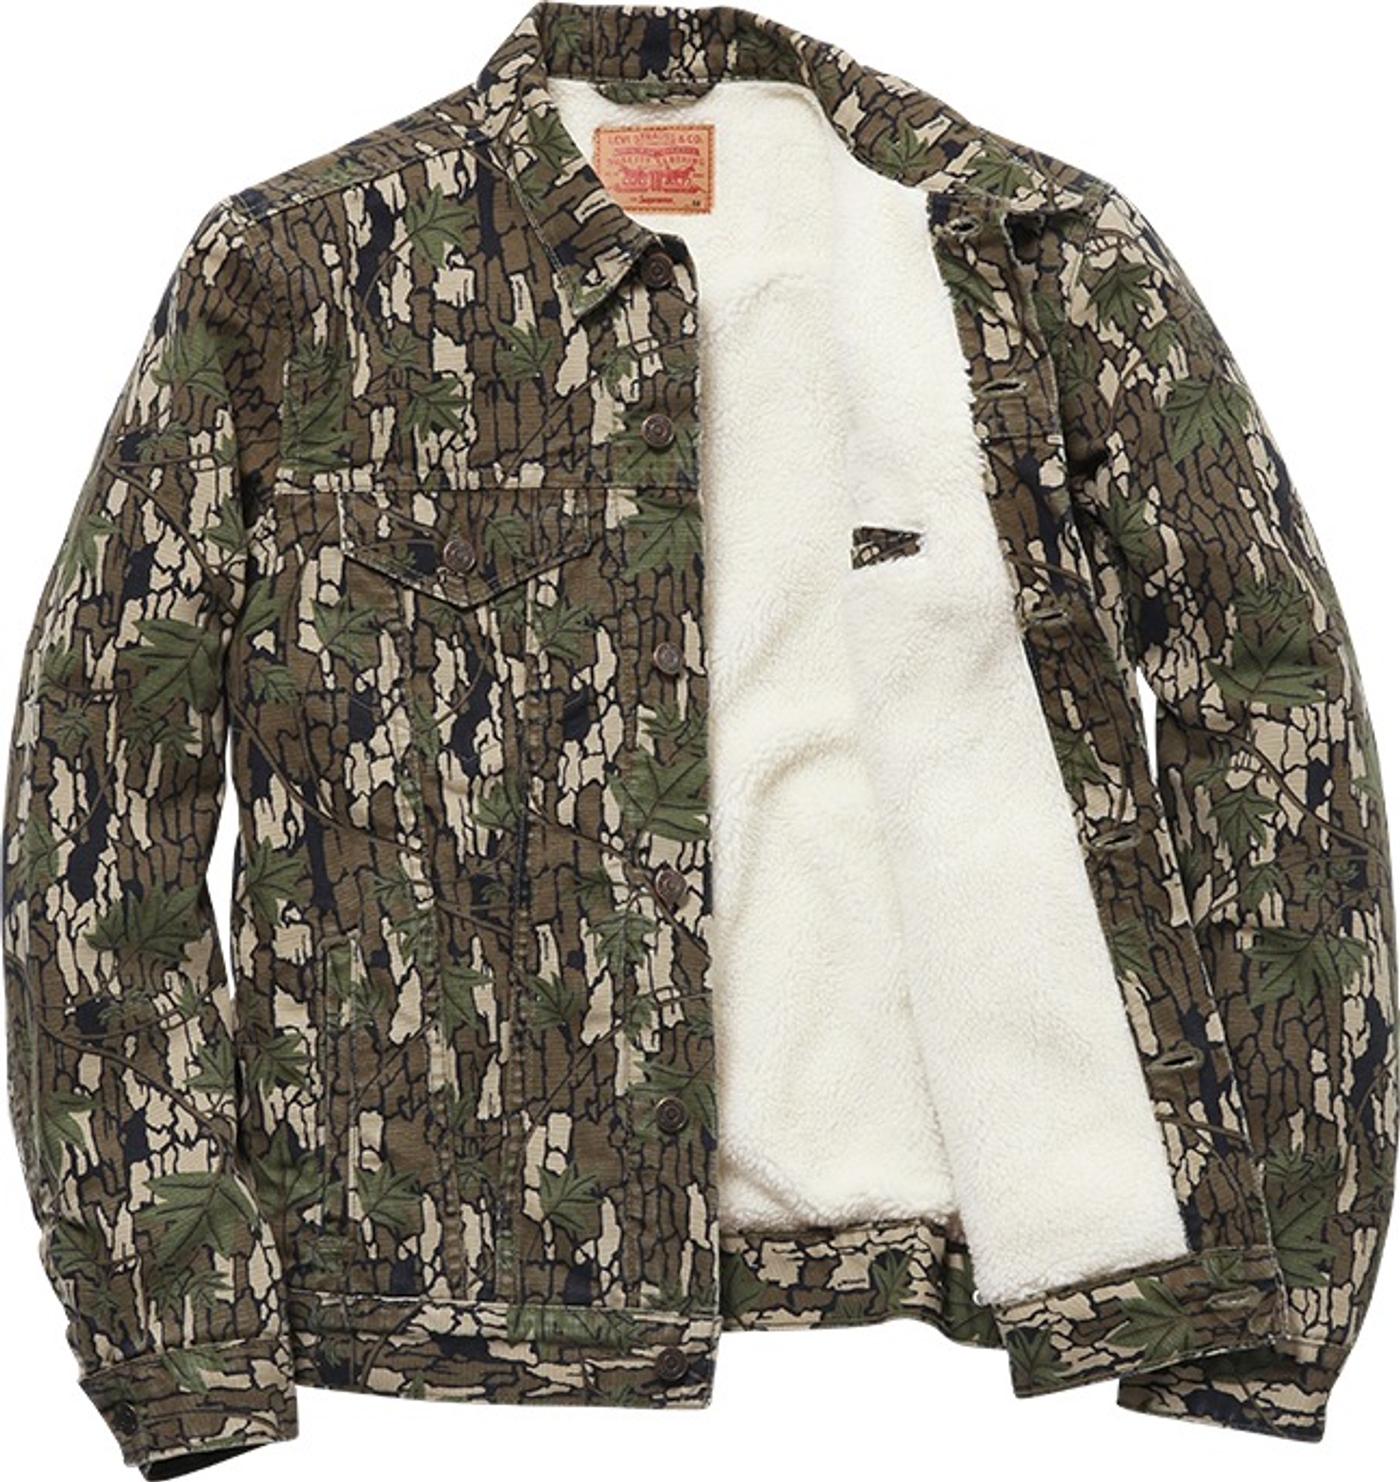 Sherling Lined Camouflage Canvas Trucker Jacket (5/12)